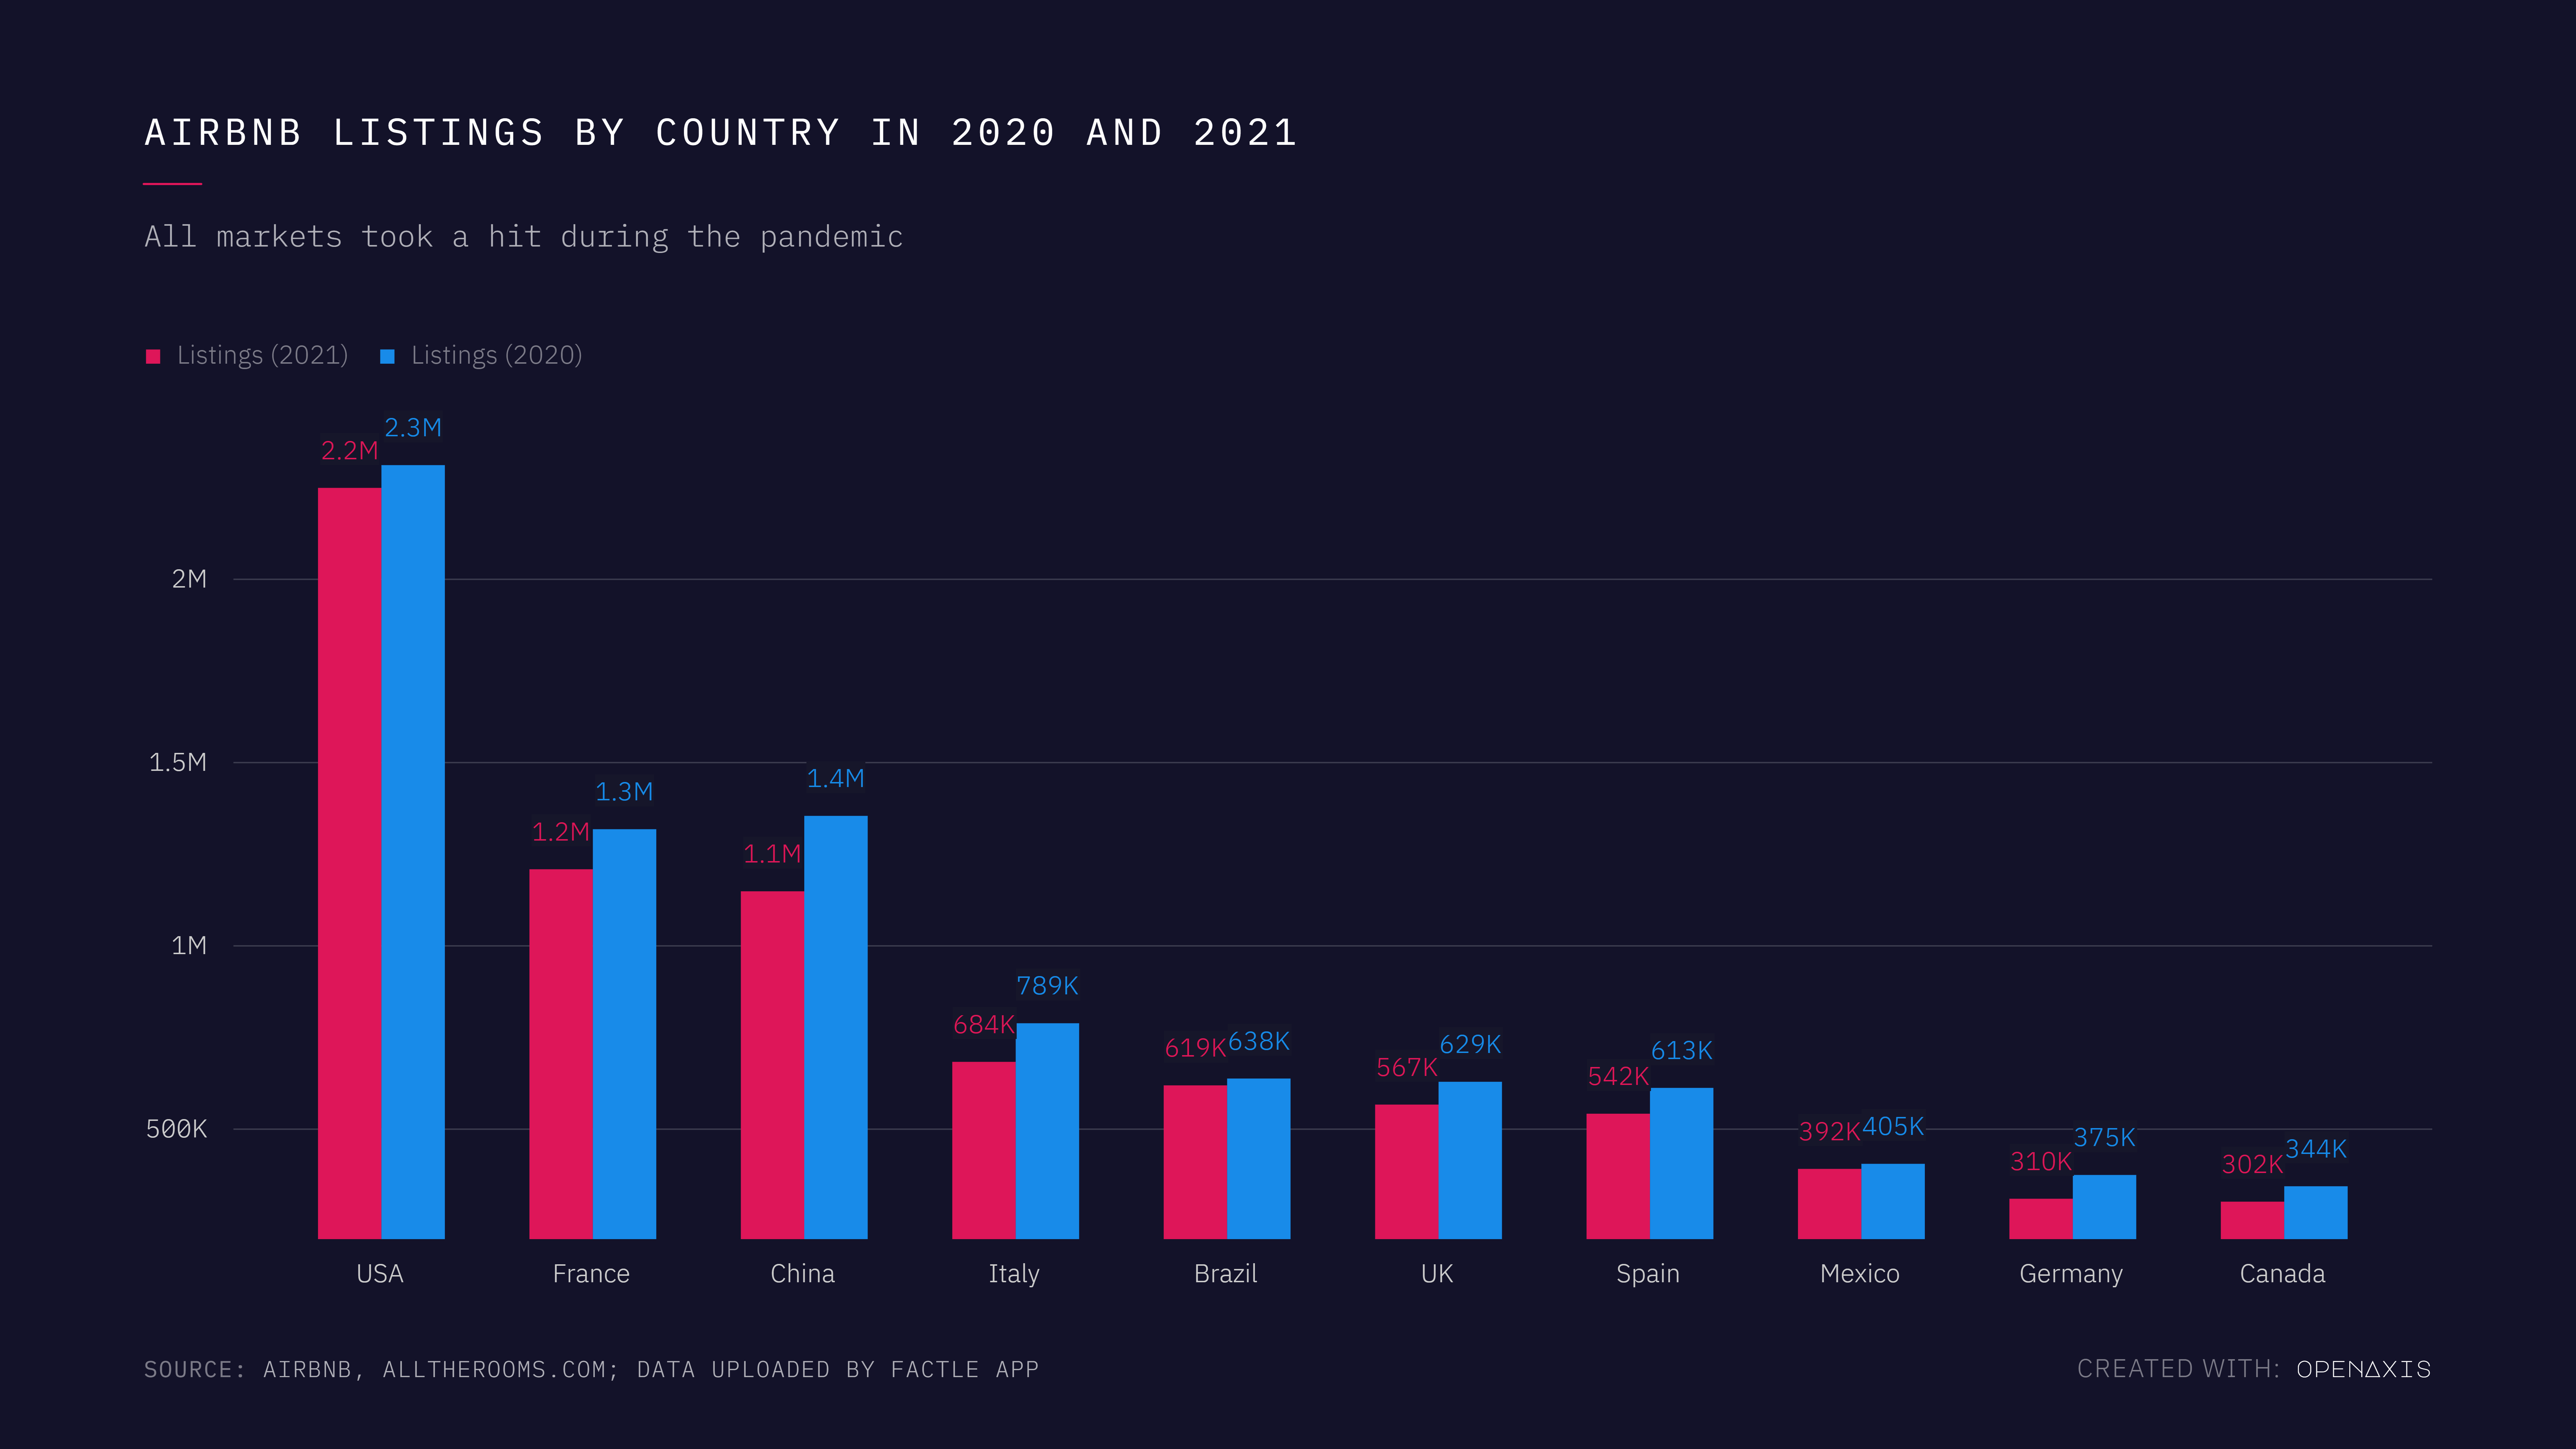 AirBnB listings by country in 2020 and 2021